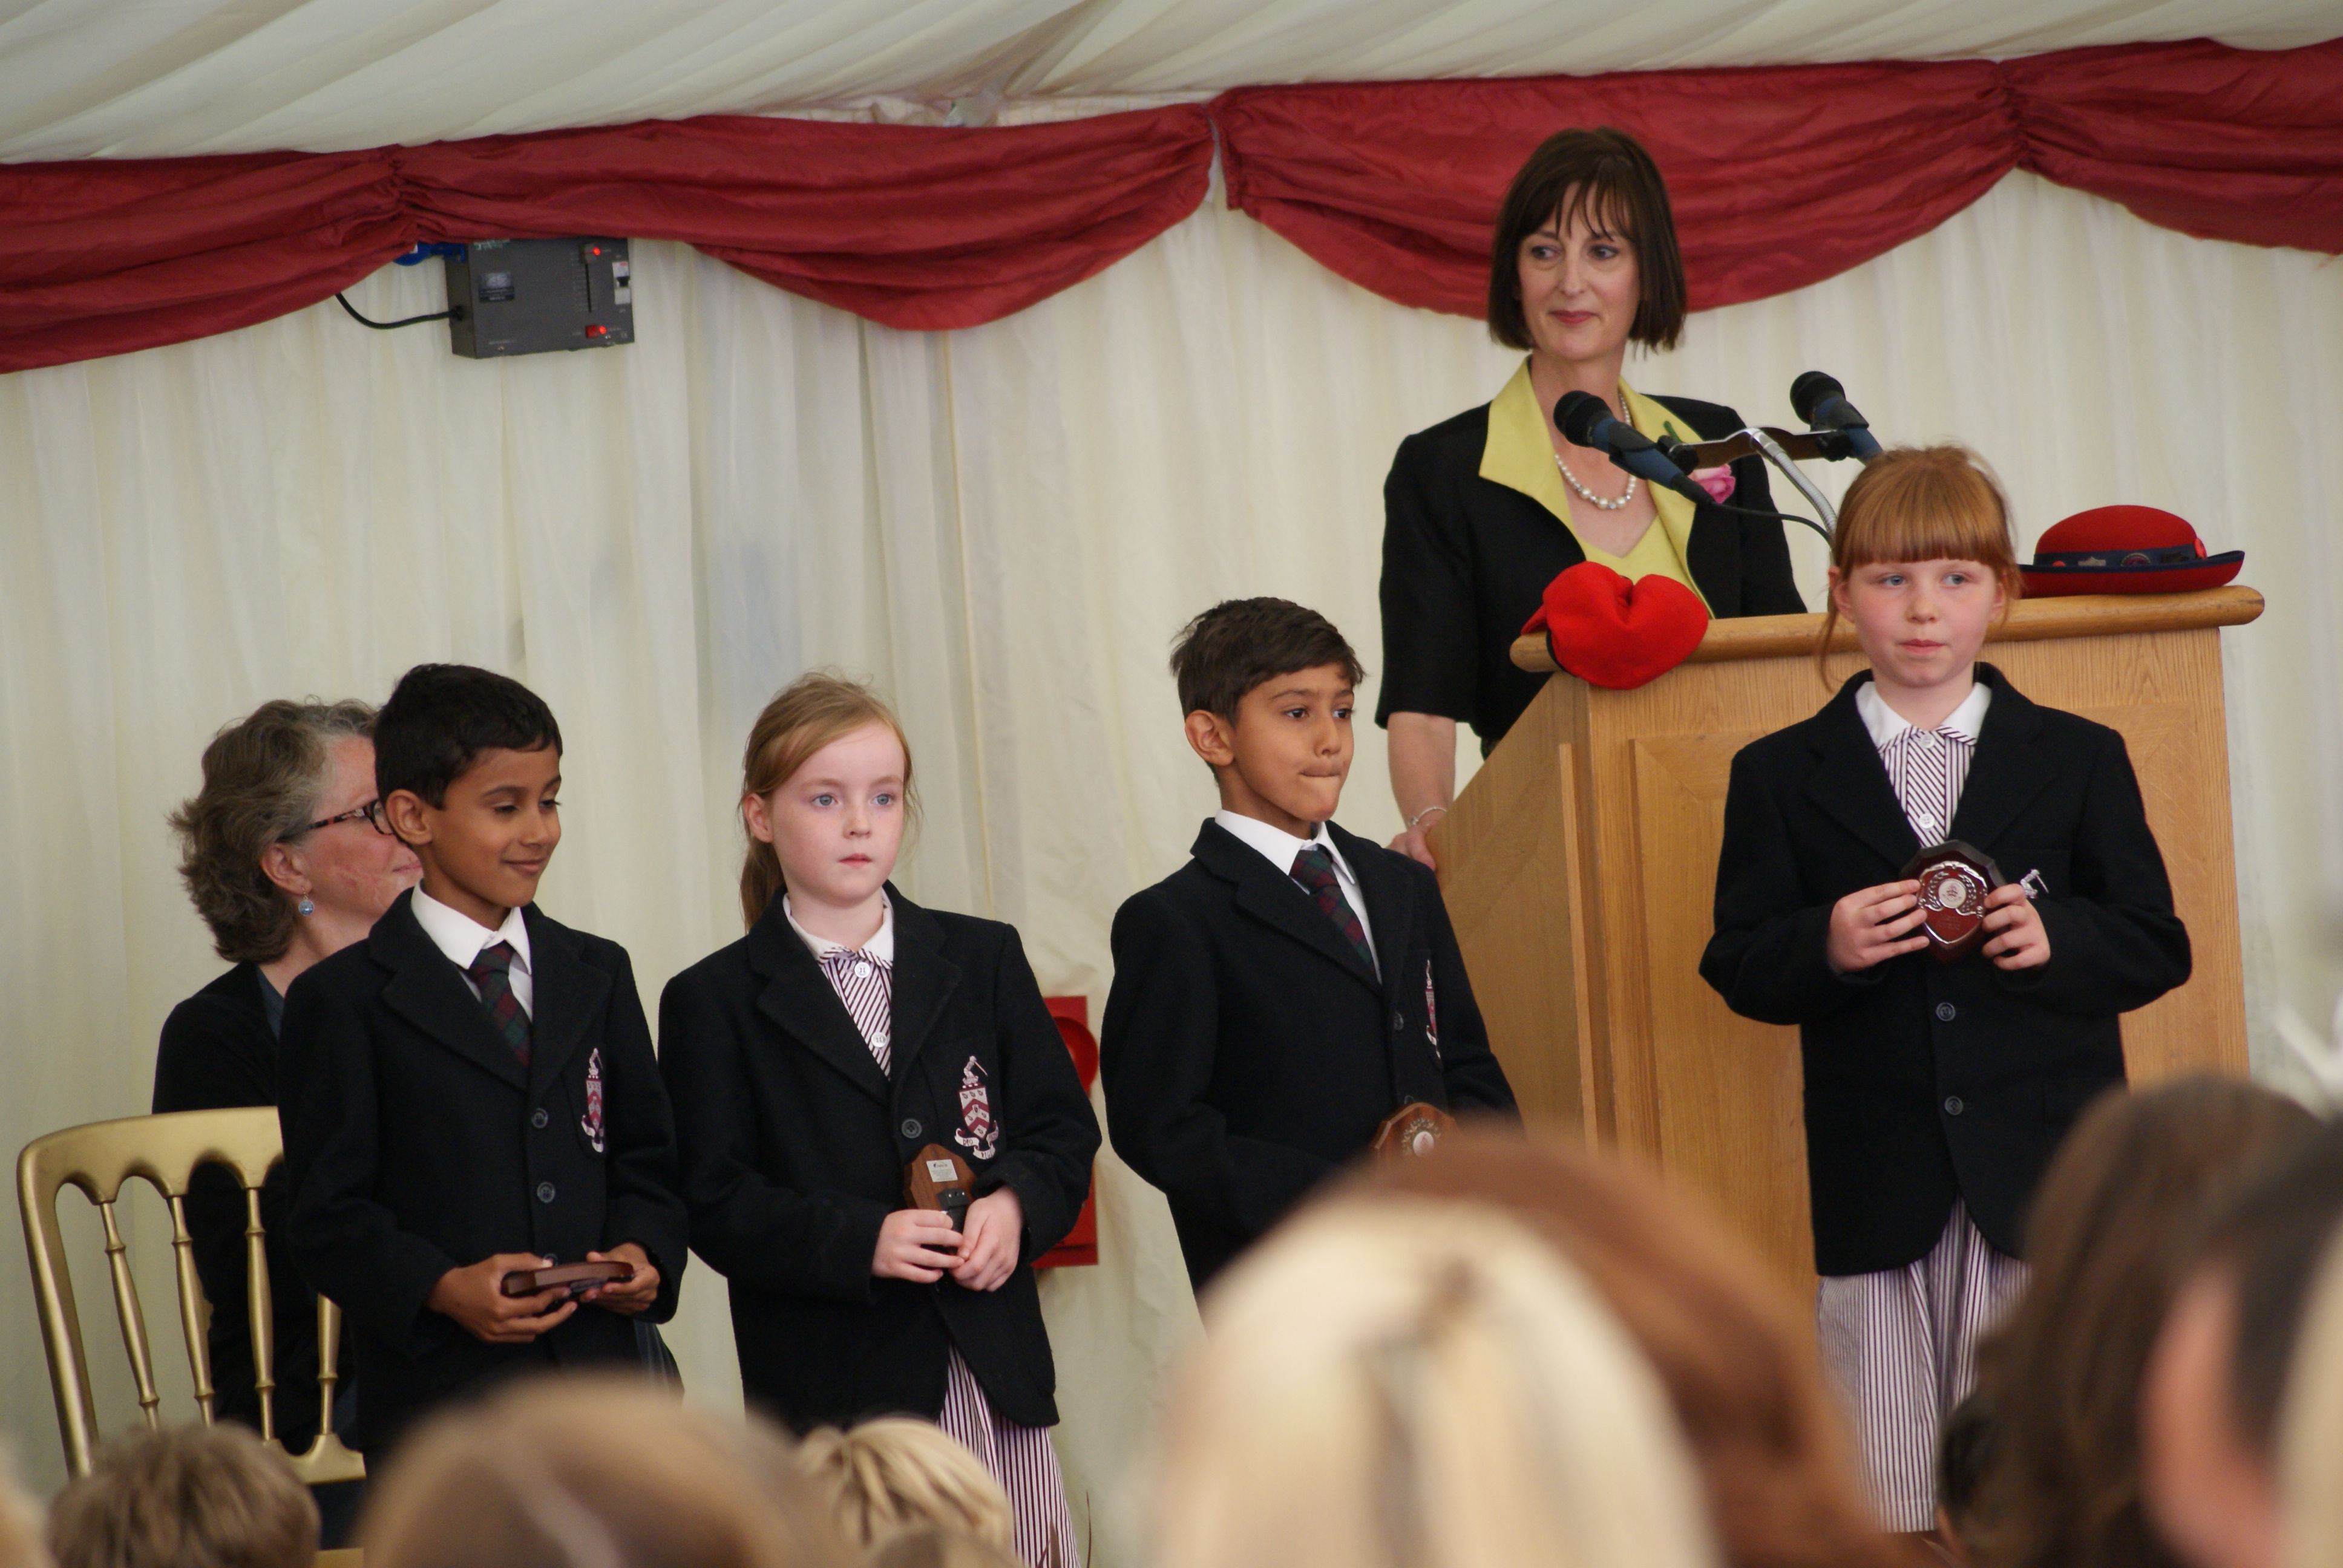 Year 2 Prizegiving ceremony, 25th June 2015